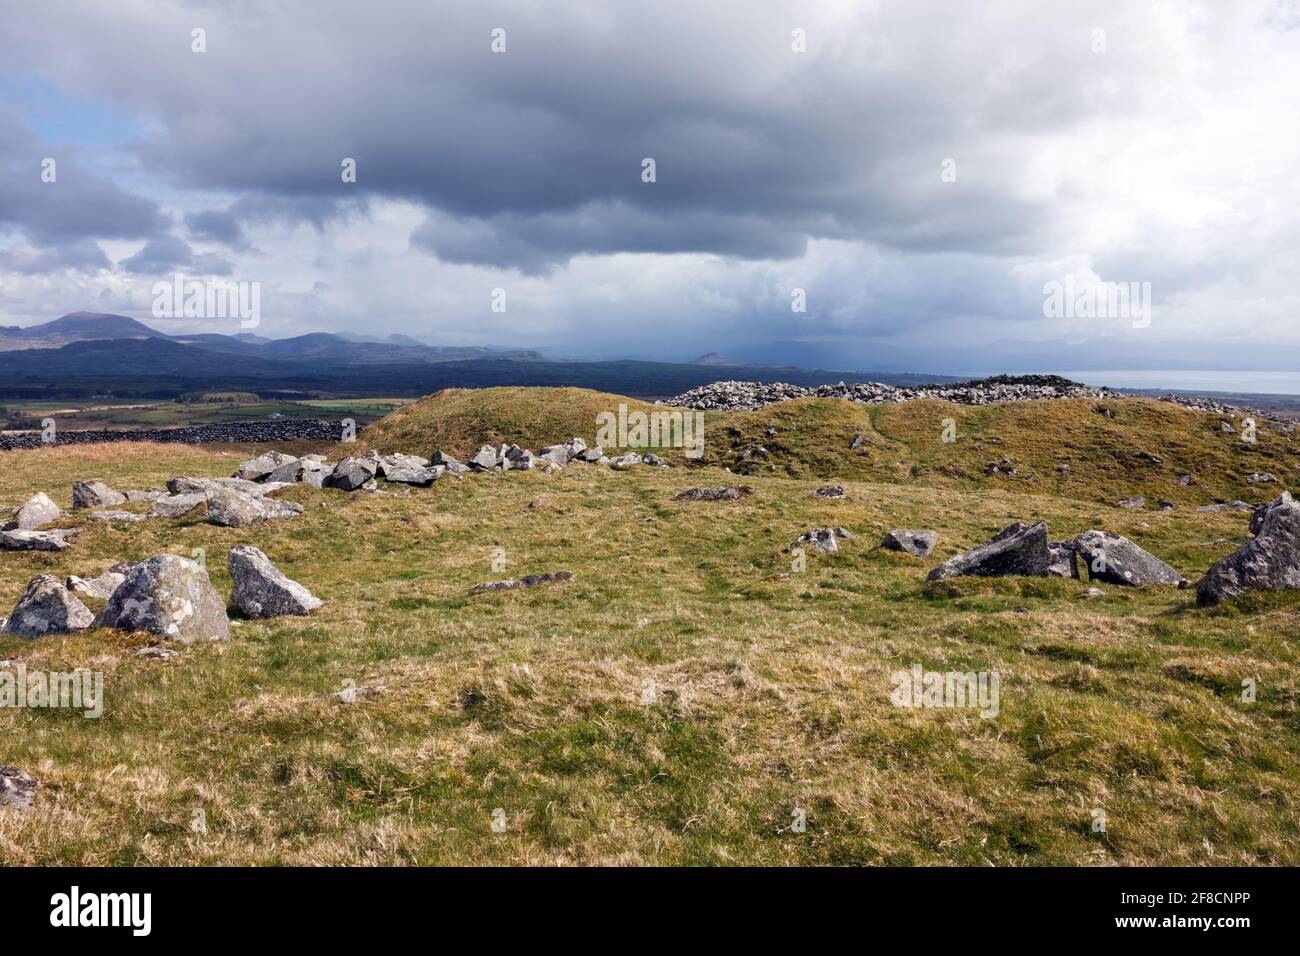 Carn Pentyrch Hillfort is an Iron Age, concentric stone-walled enclosure complex near Llangybi on the Lleyn Peninsula in North Wales. Stock Photo